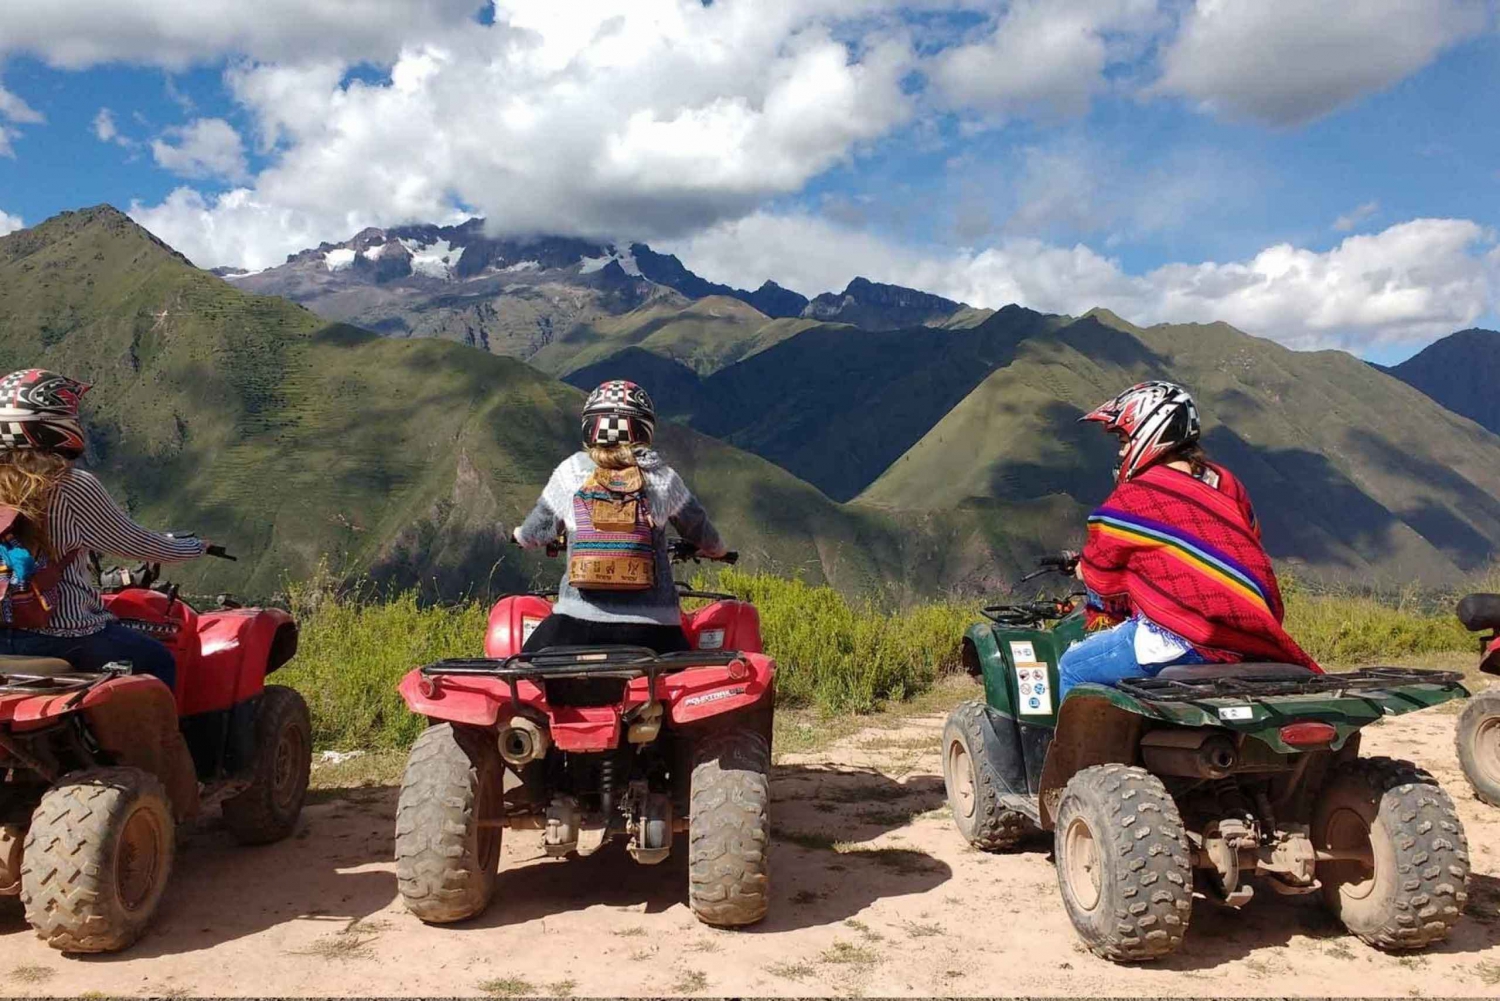 From Cusco || ATV tour of the Sacred Valley of the Incas